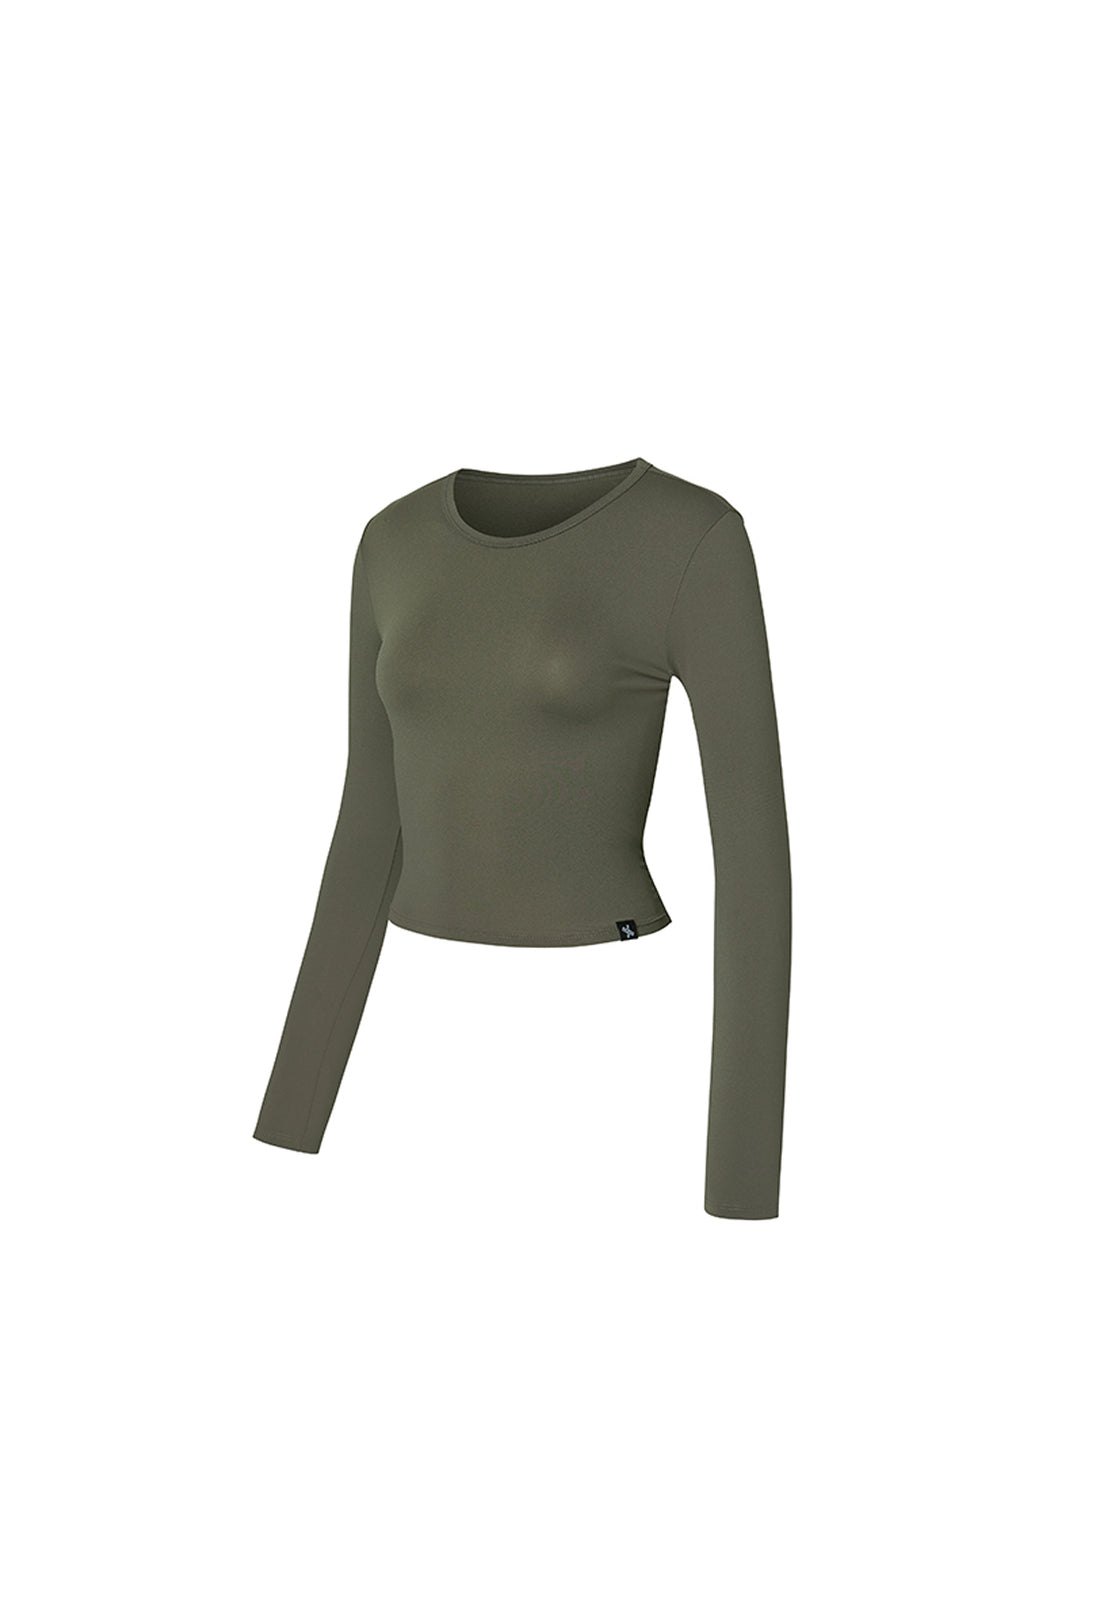 All Day Feather Crop Top - Forest Khaki (Clearance)